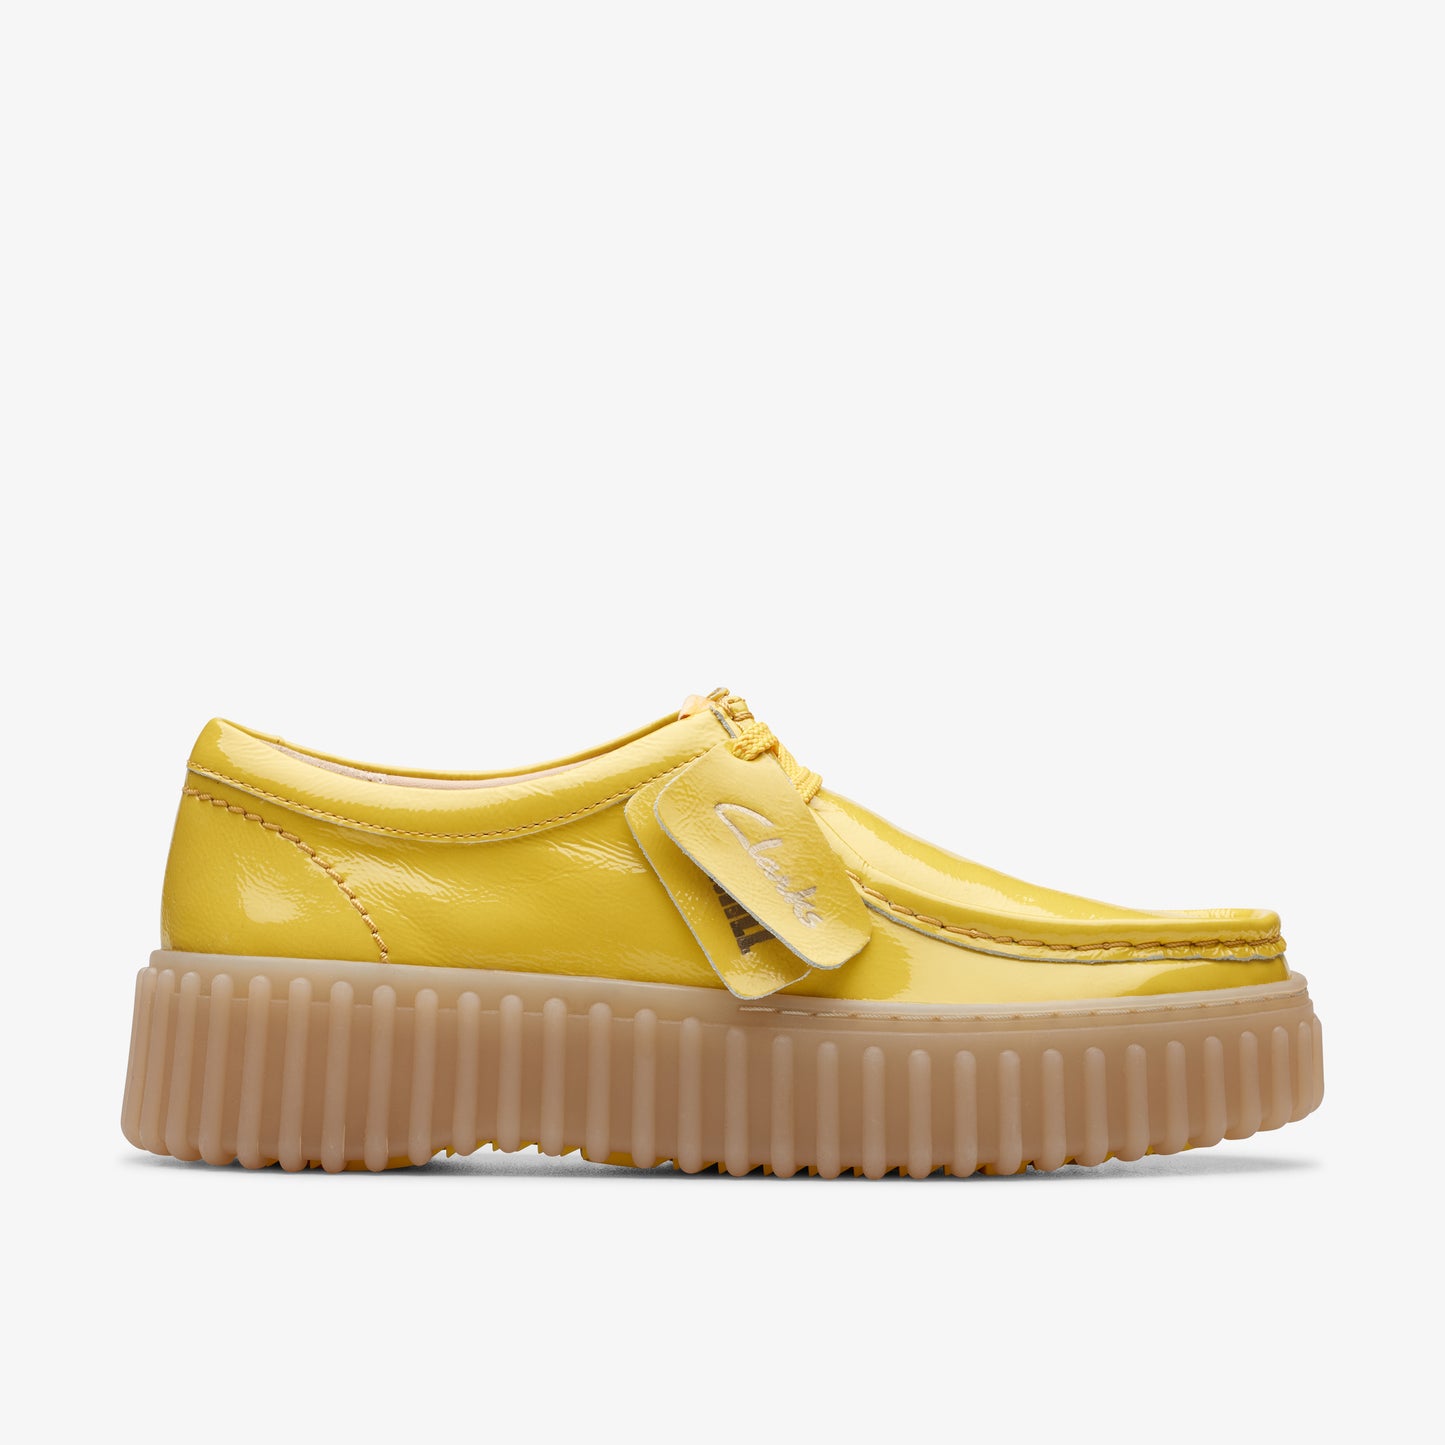 Torhill Bee Patent Leather Yellow